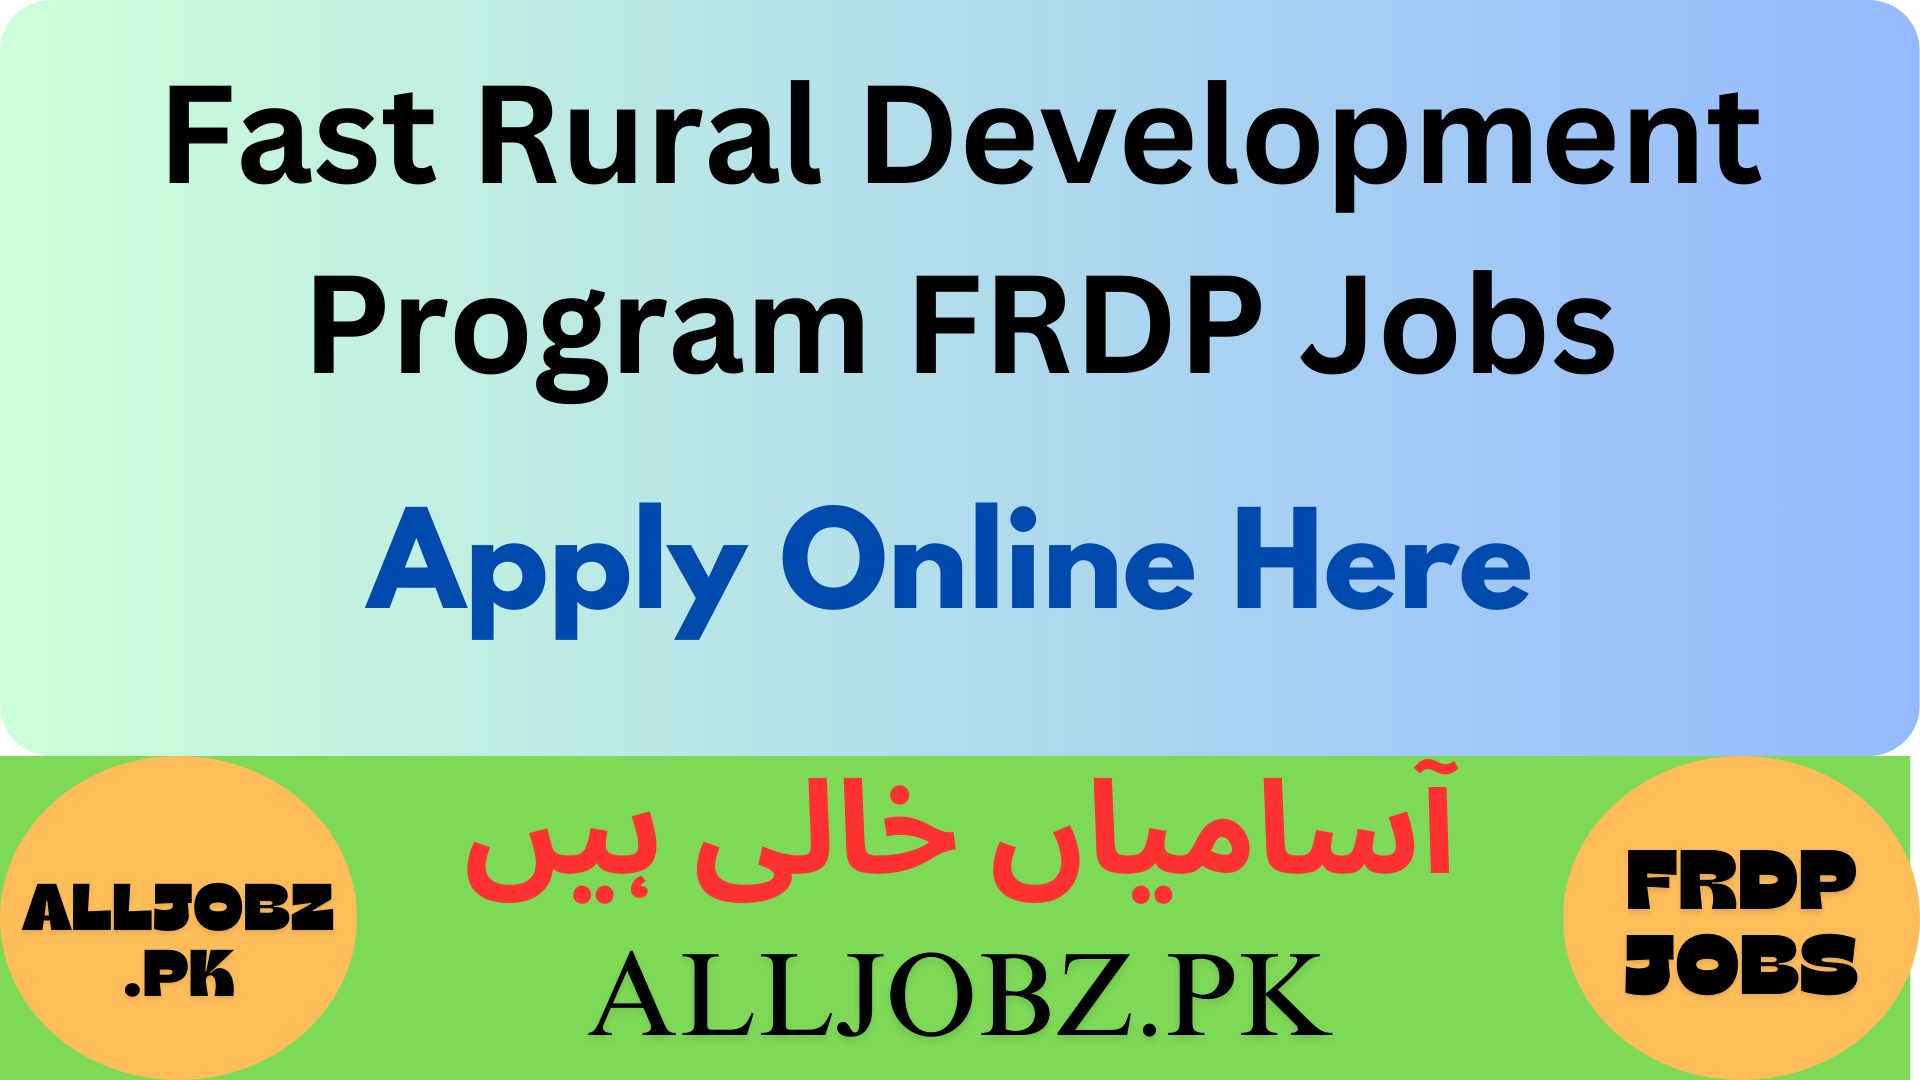 Fast Rural Development Program Frdp Jobs Apply Online, Frdp Jobs, Rural Development Jobs, Non-Profit Organization Jobs, Wash Engineer Positions, Meal Coordinator Jobs, Sustainable Development Careers, Frdp Career Opportunities, How To Apply For Frdp Jobs, Rural Community Development Jobs, Job Vacancies In Frdp, Non-Profit Job Openings, Frdp Hyderabad Jobs, Jobs In Rural Areas, Frdp Job Application, Development Sector Jobs, Community Empowerment Jobs, Latest Frdp Job Vacancies, Water Sanitation Hygiene Jobs, Monitoring And Evaluation Careers, Frdp Official Website.